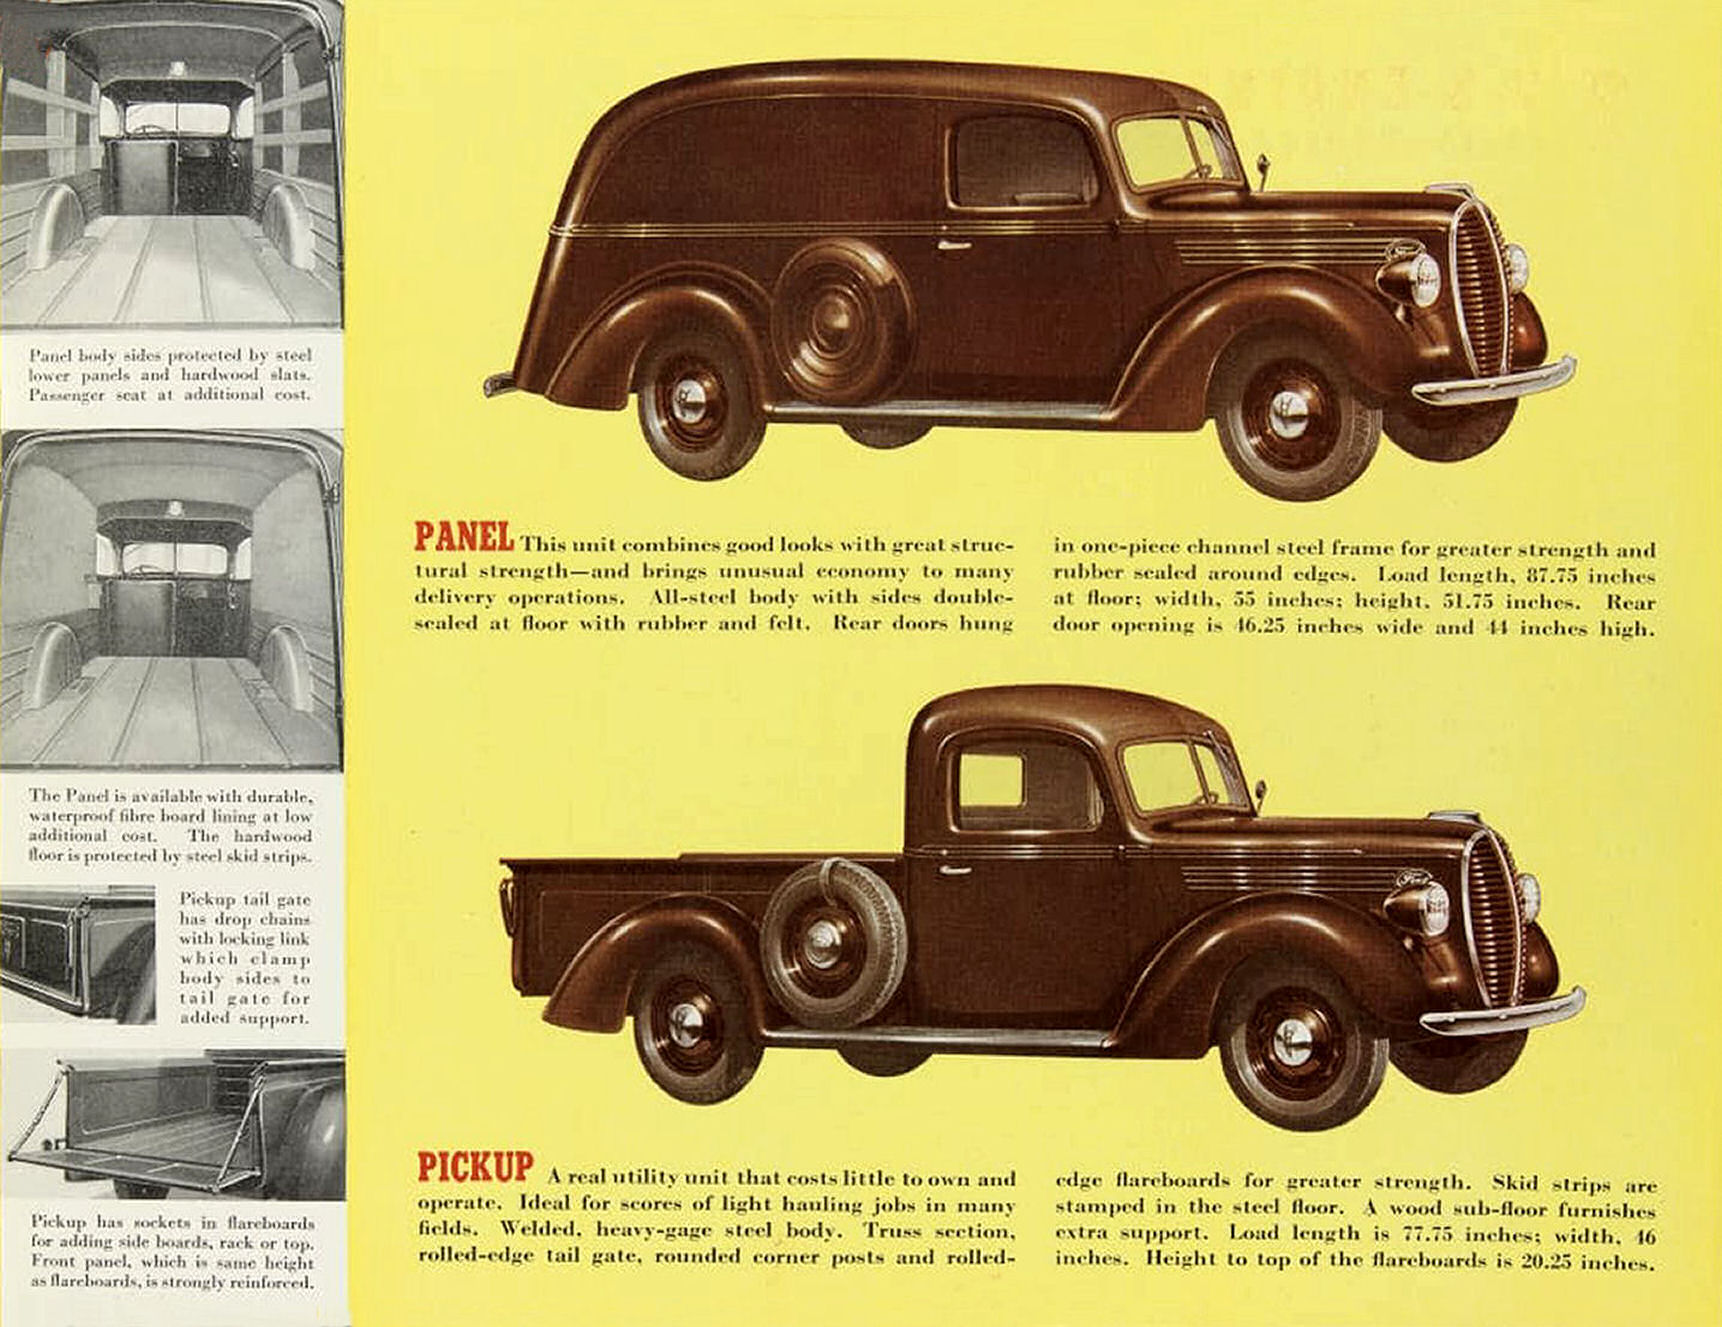 1939_Ford_Commercial_Cars-03